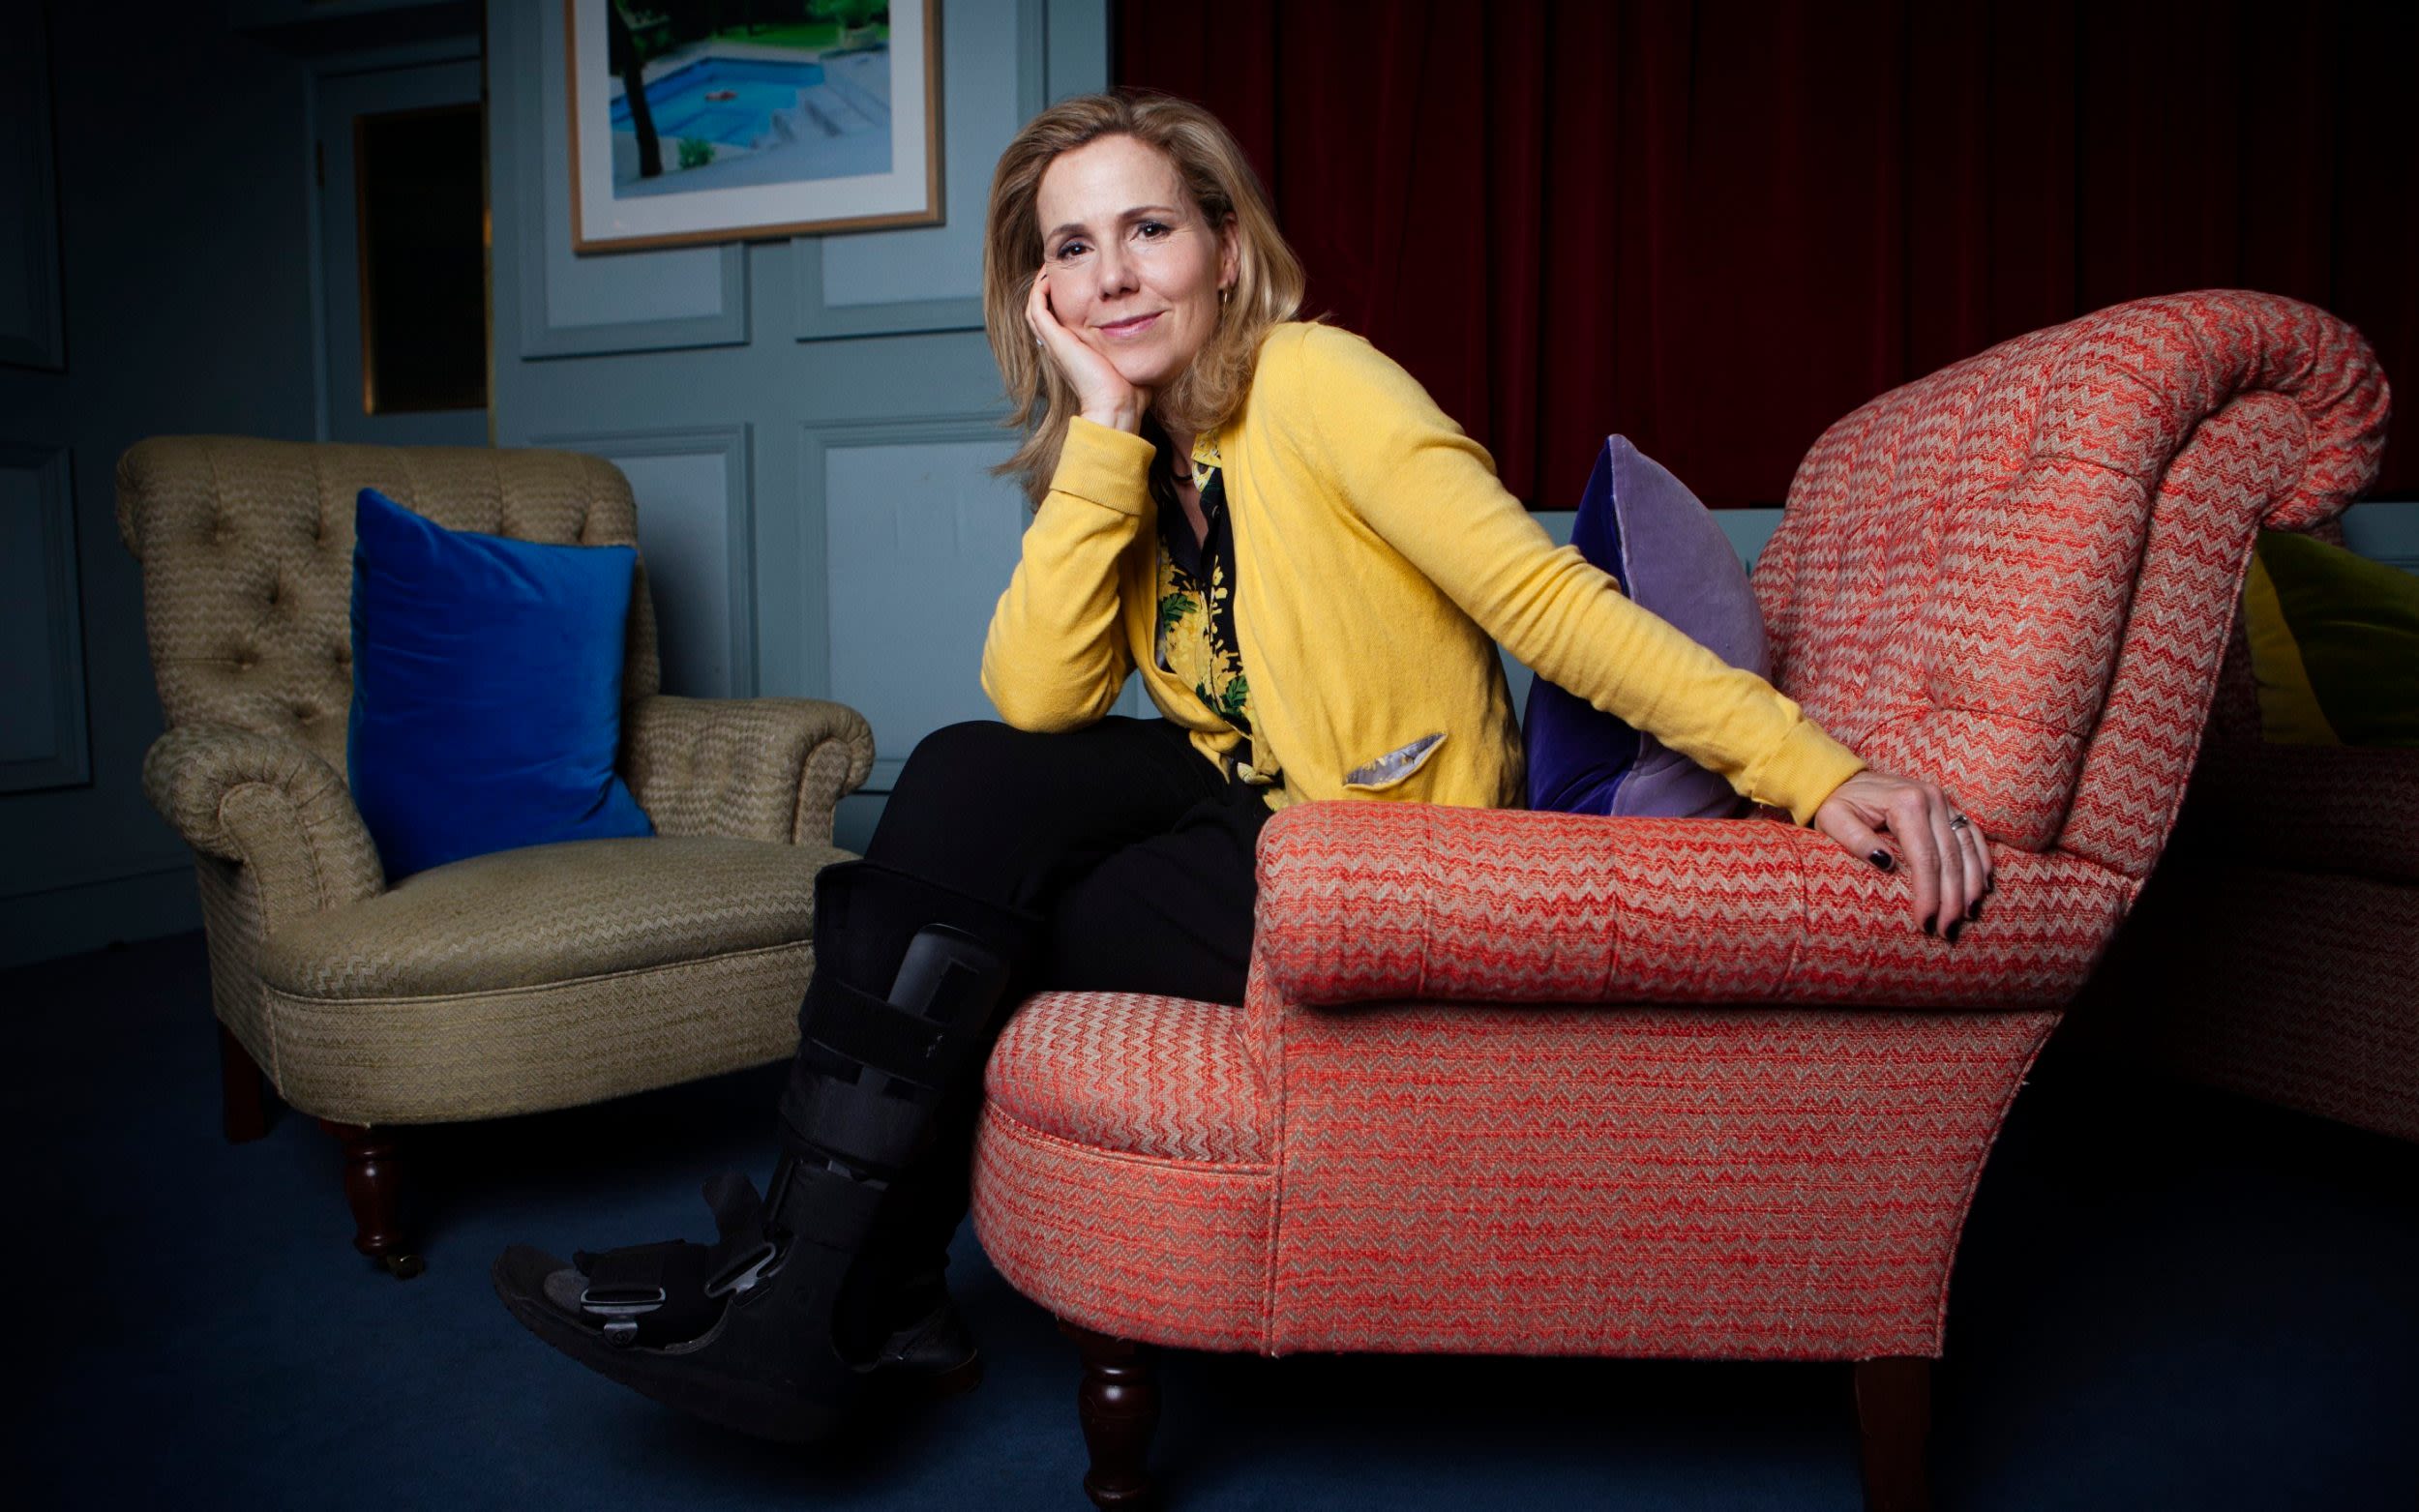 ‘I’m bored of playing cougars’, says Sally Phillips